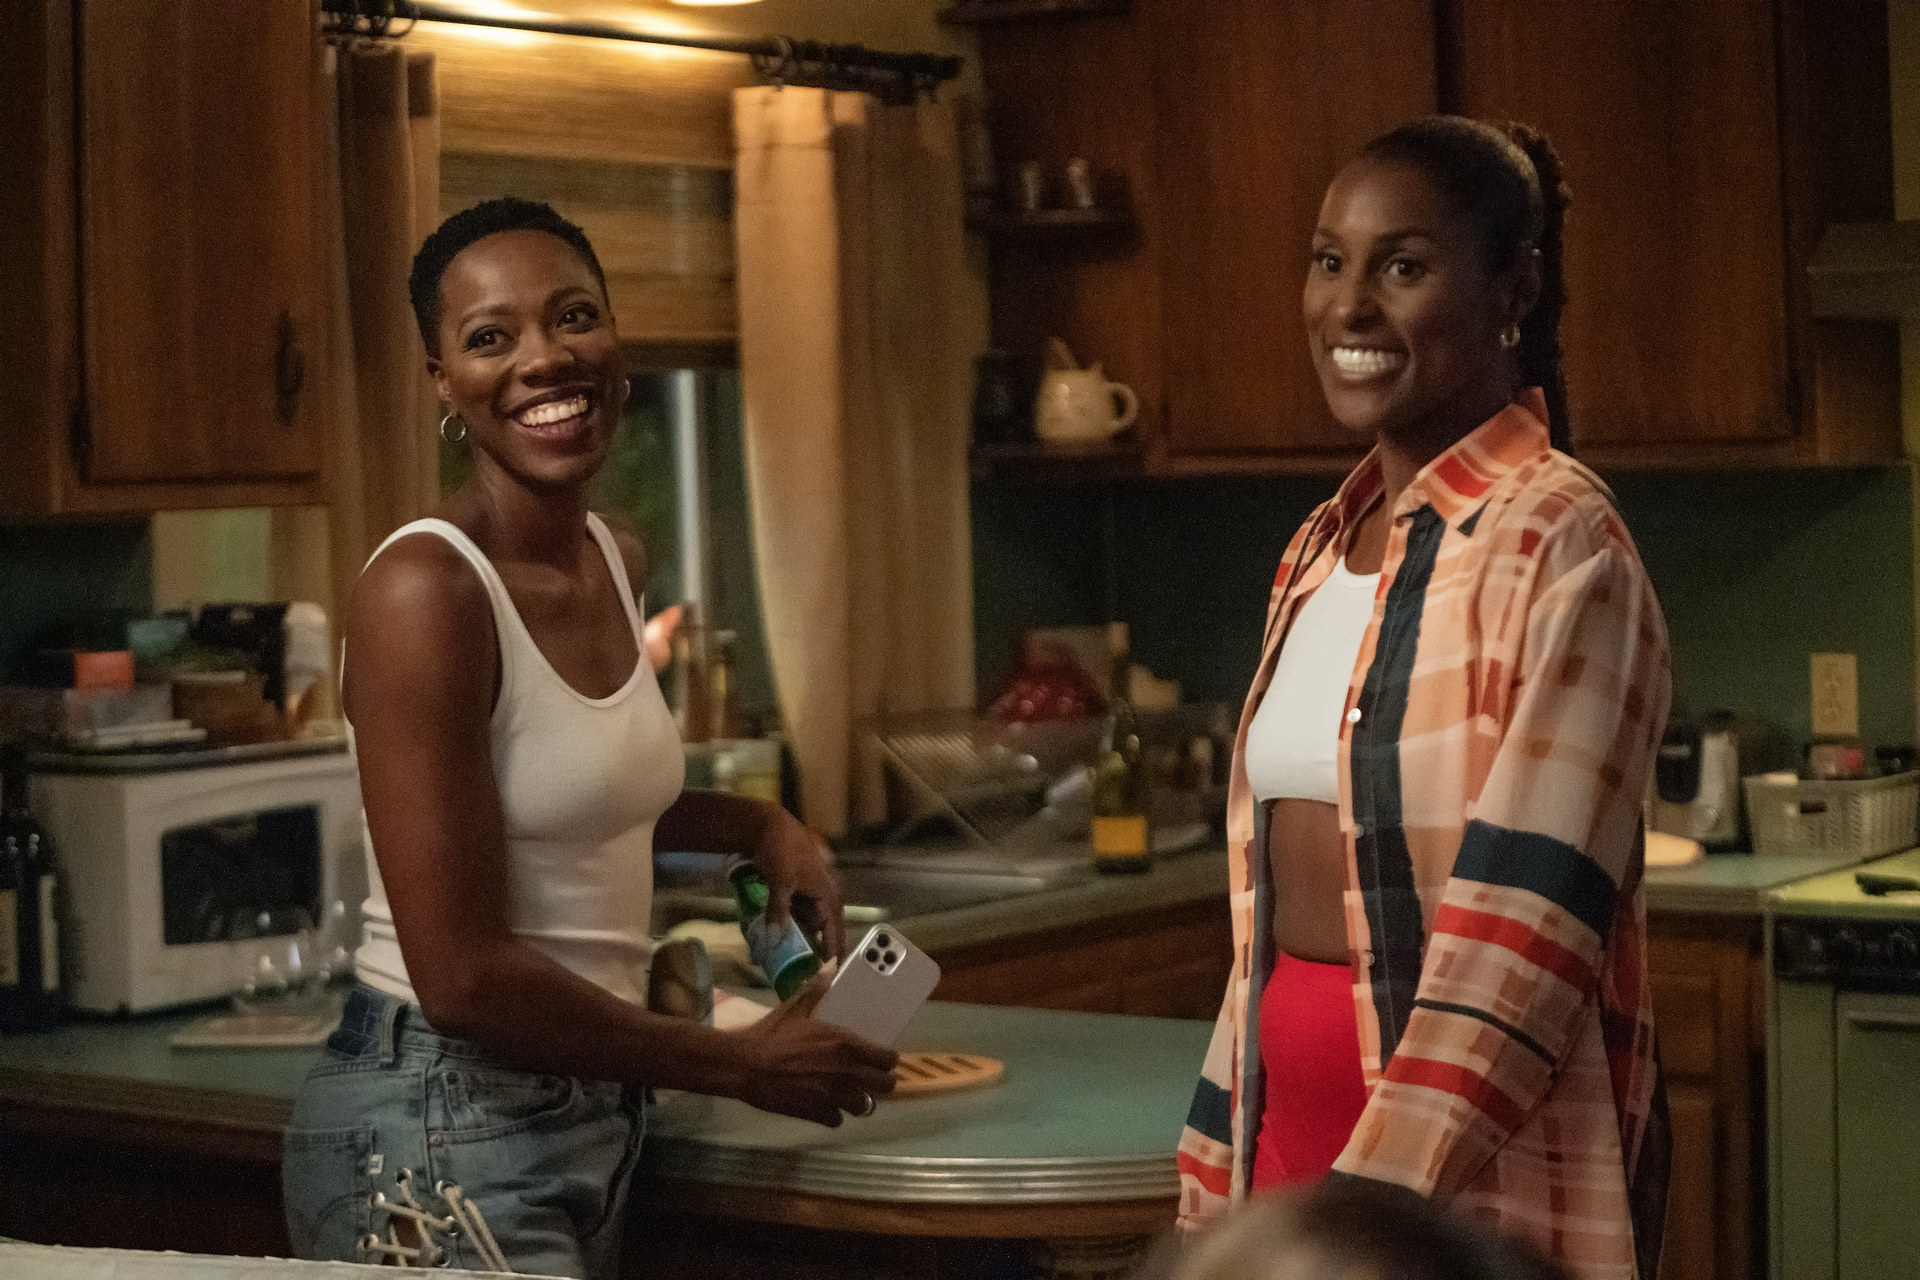 Issa Rae and Yvonne Orji stand in a kitchen